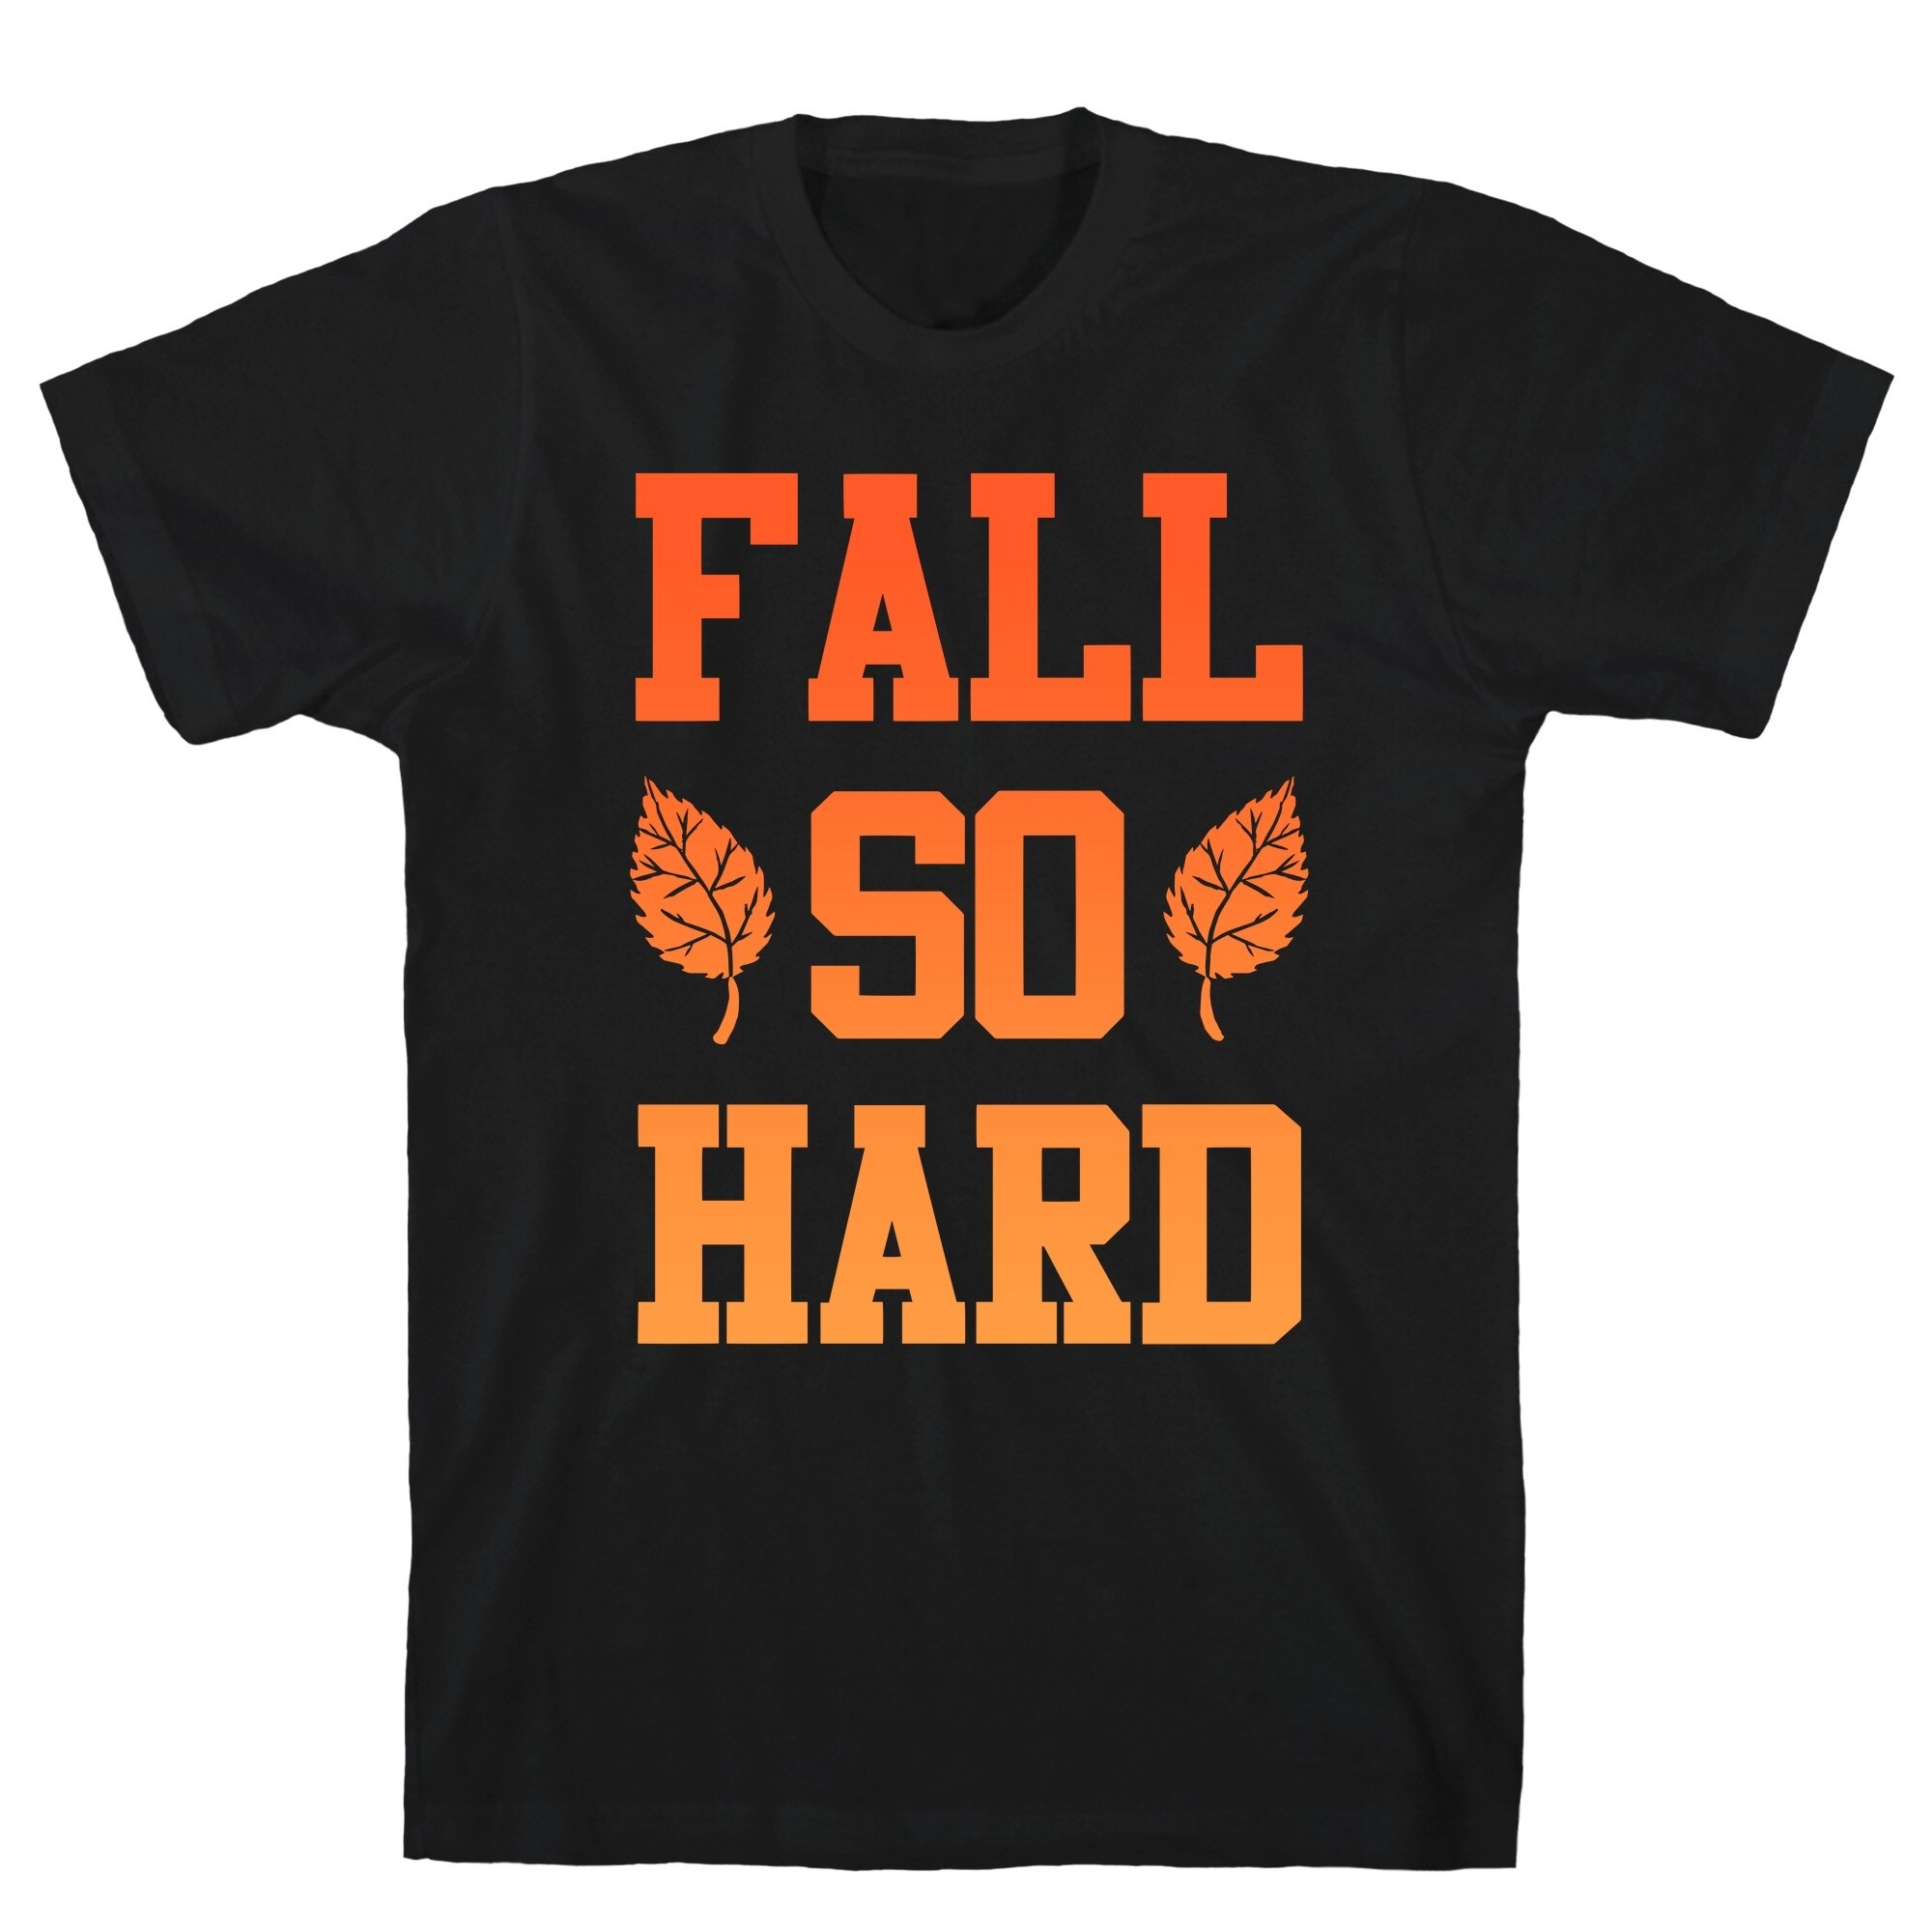 Fall So Hard Black Men's Cotton Tee by LookHUMAN